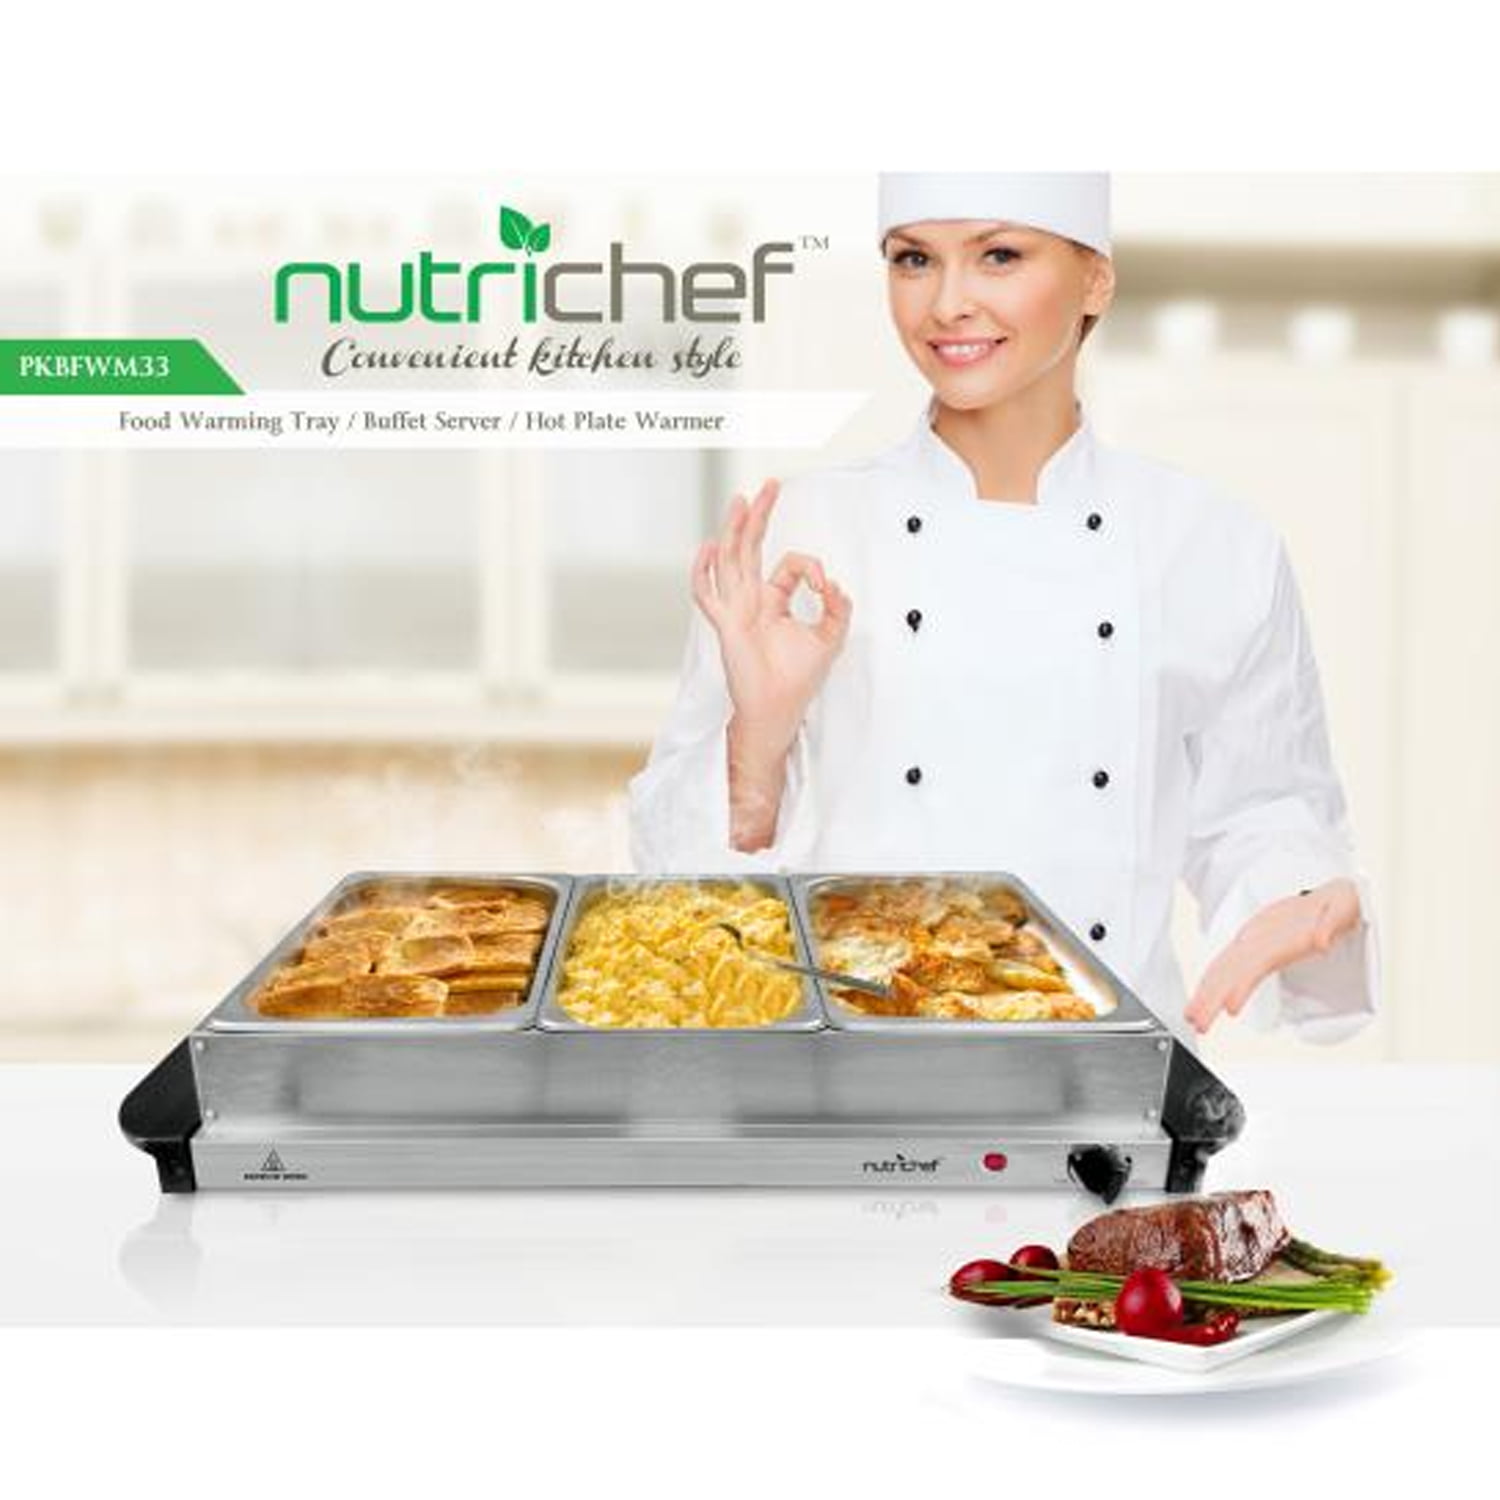 NutriChef - PKBFWM21 - Kitchen & Cooking - Food Warmers & Serving